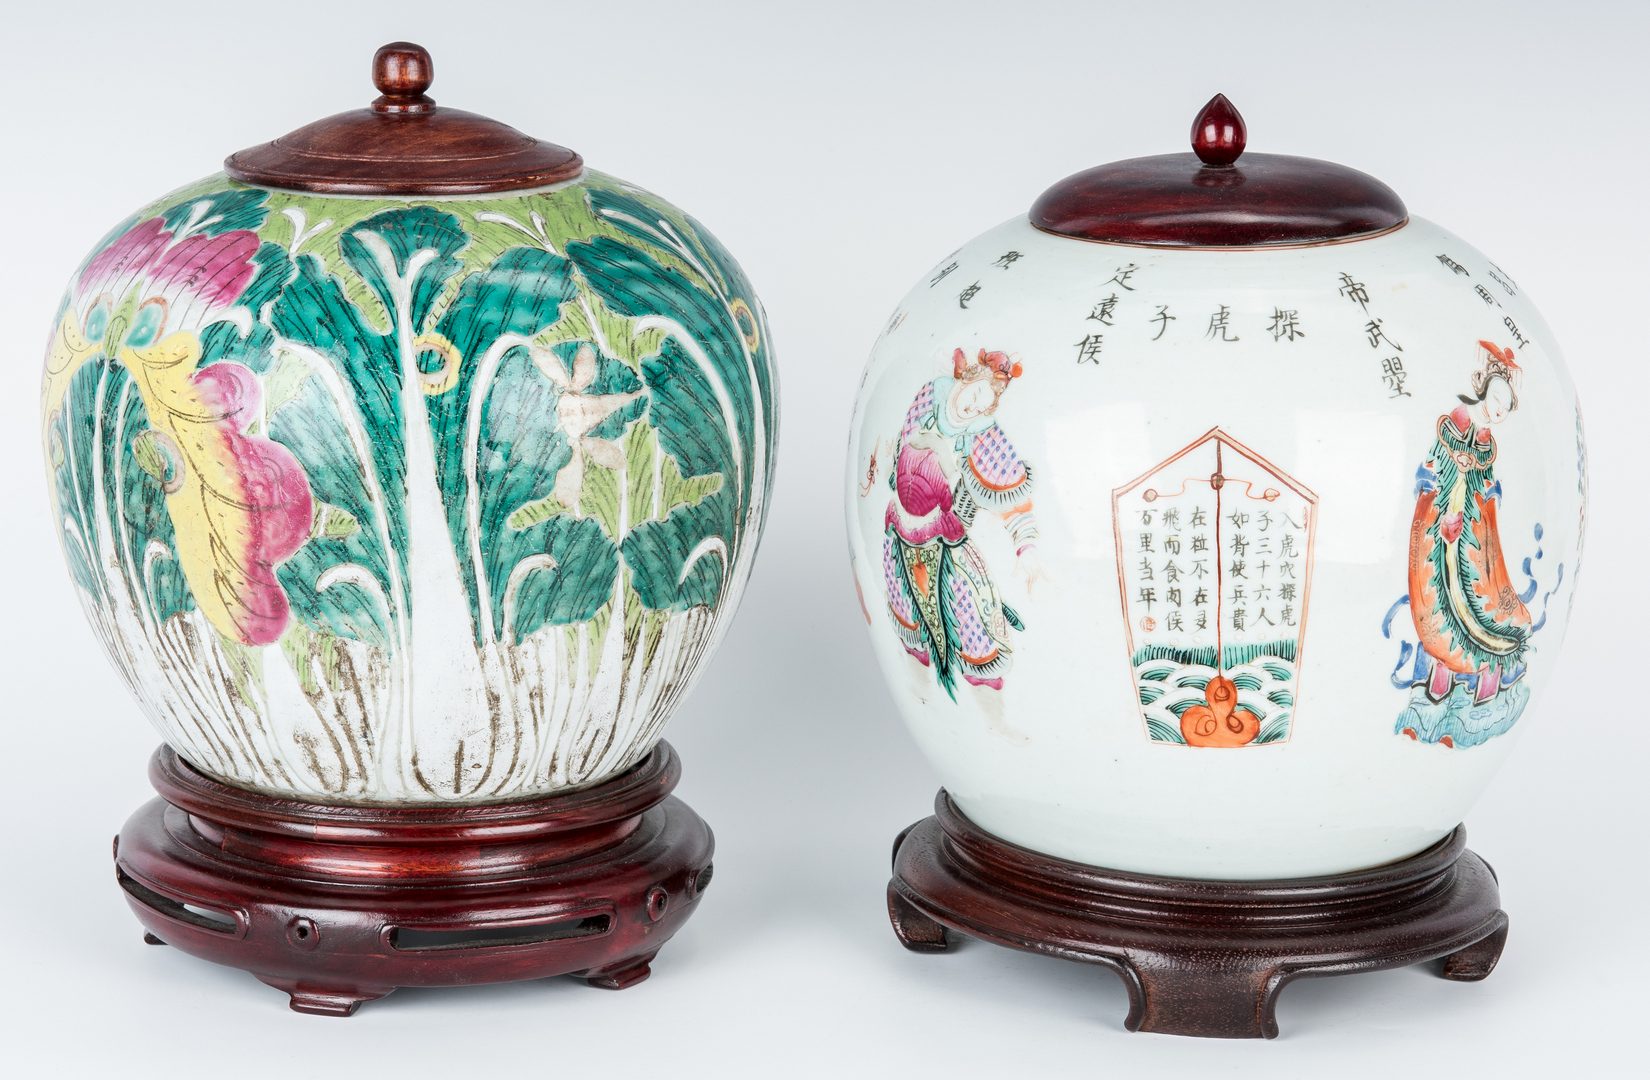 Lot 461: 2 Chinese Export Ginger Jars, early 20th c.